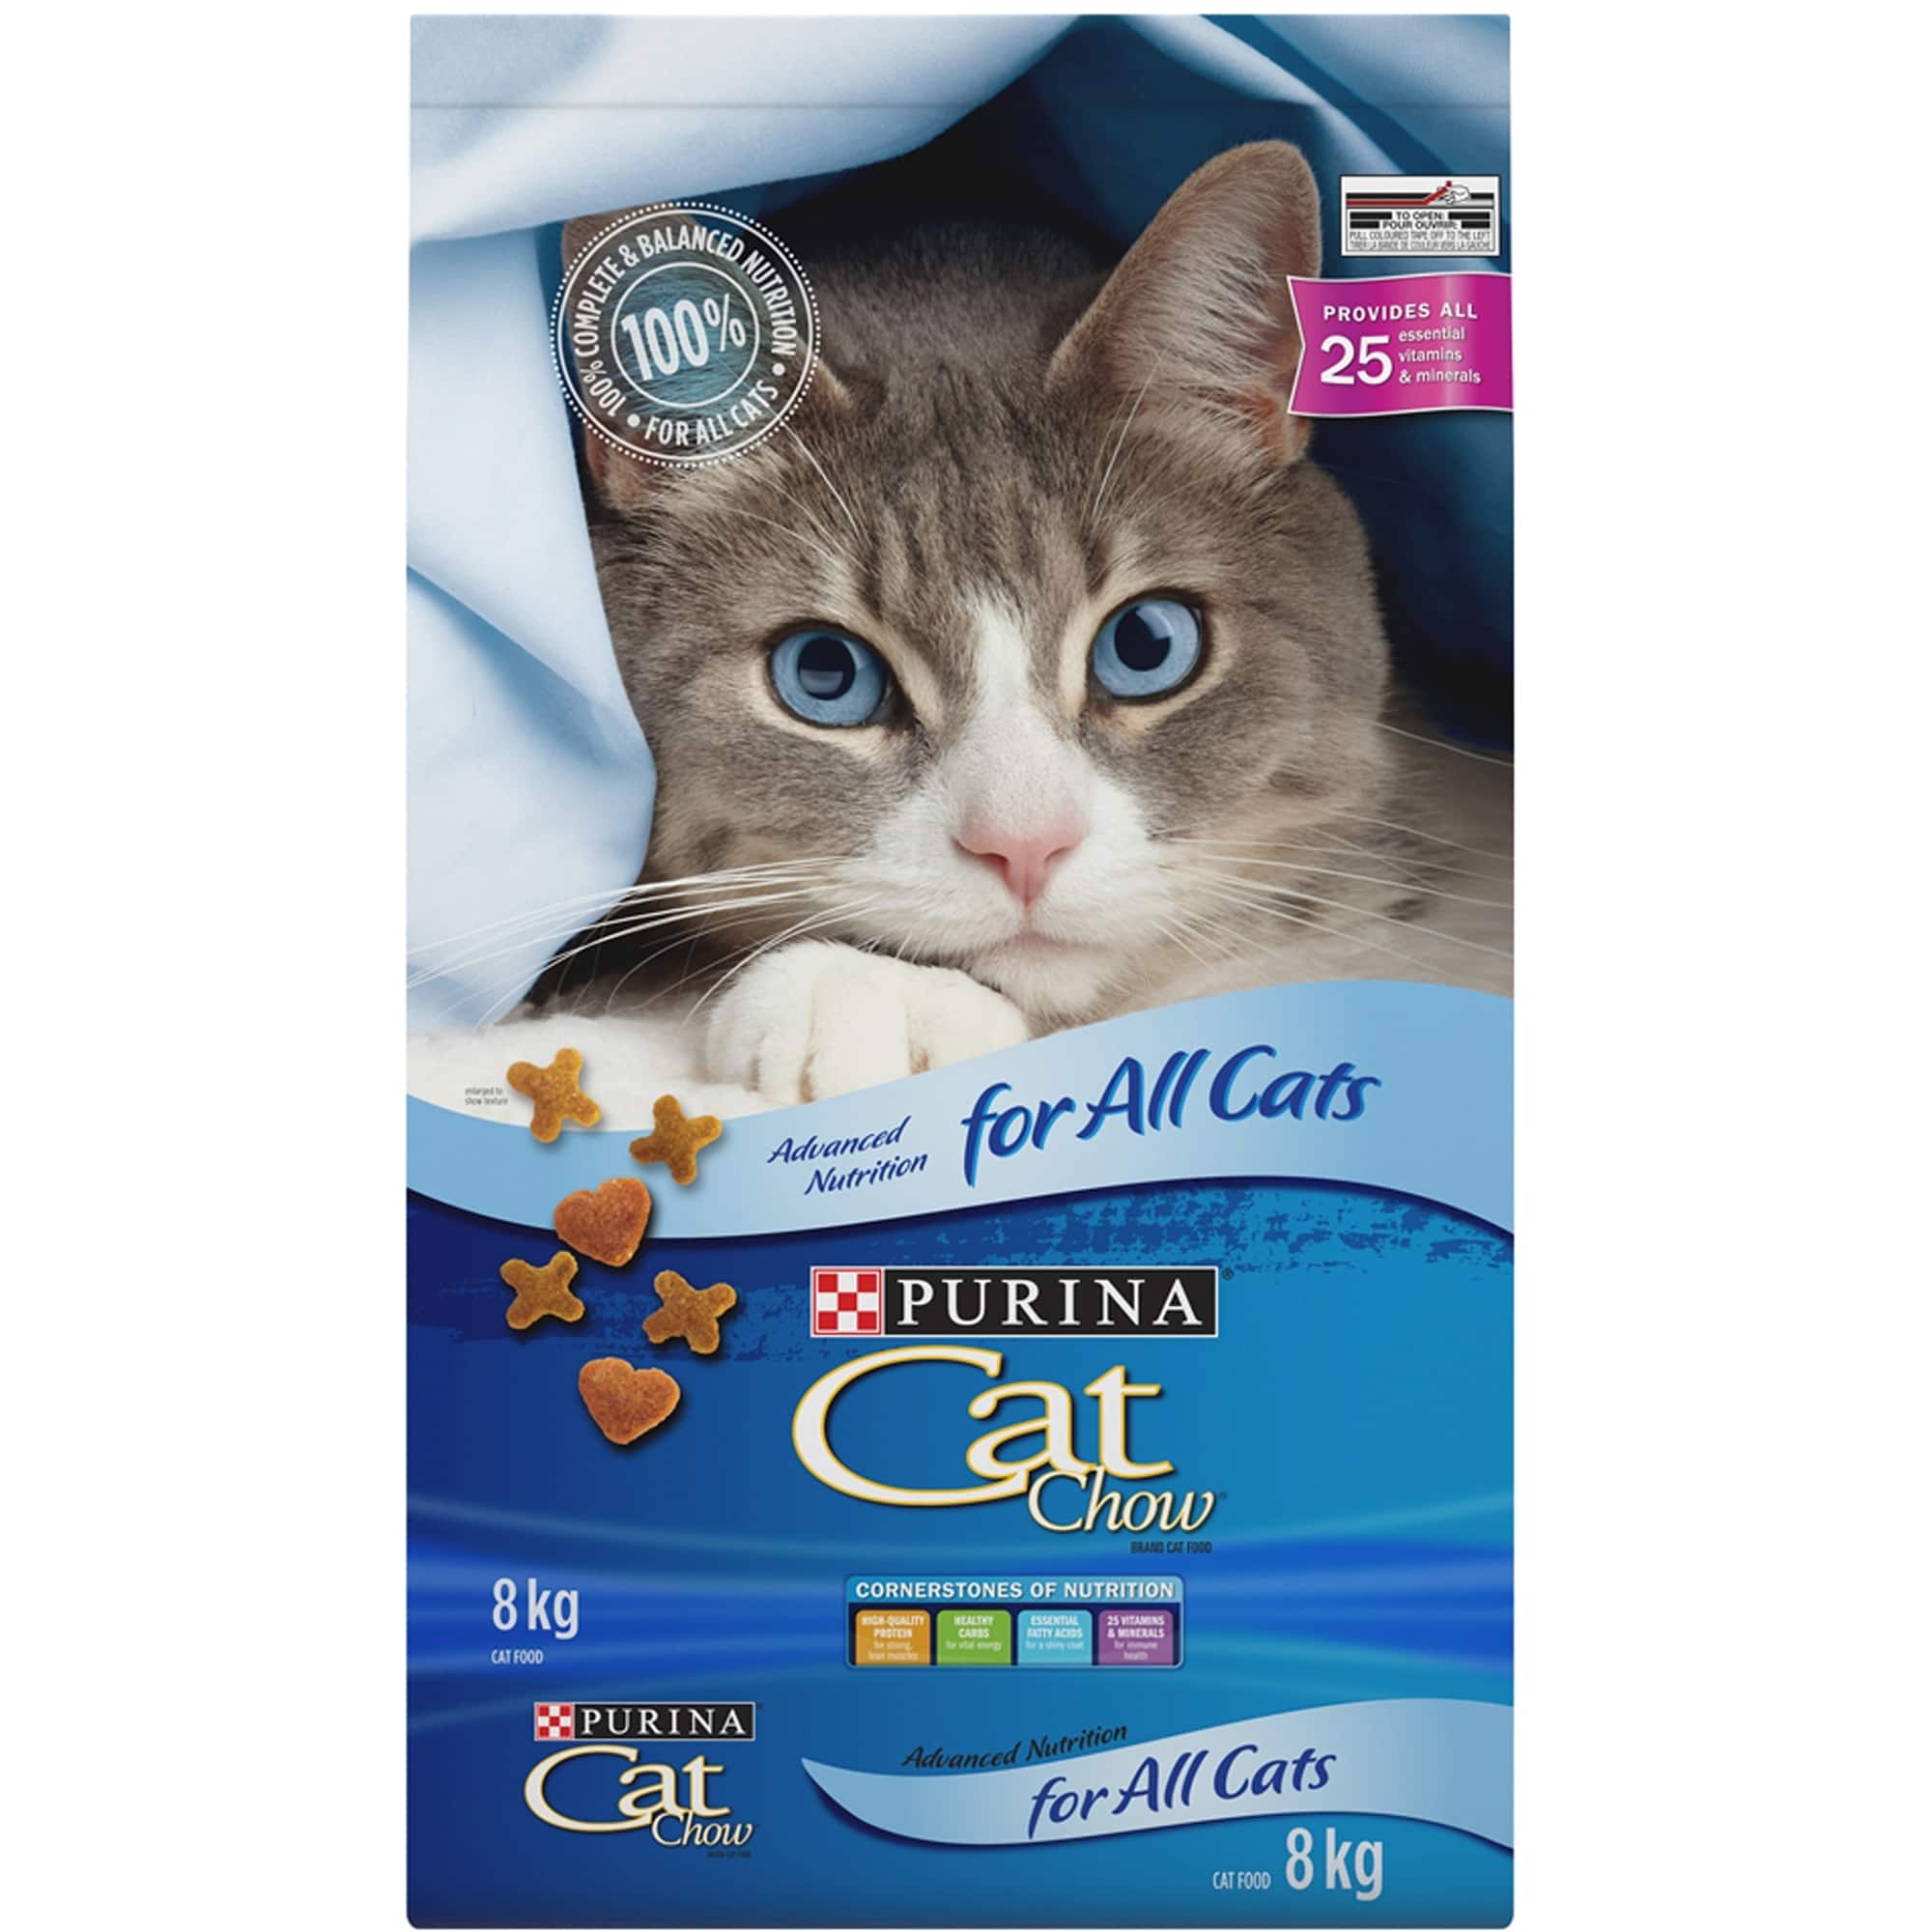 Purina® Cat Chow® Advanced Nutrition for All Cats Cat Food 8kg